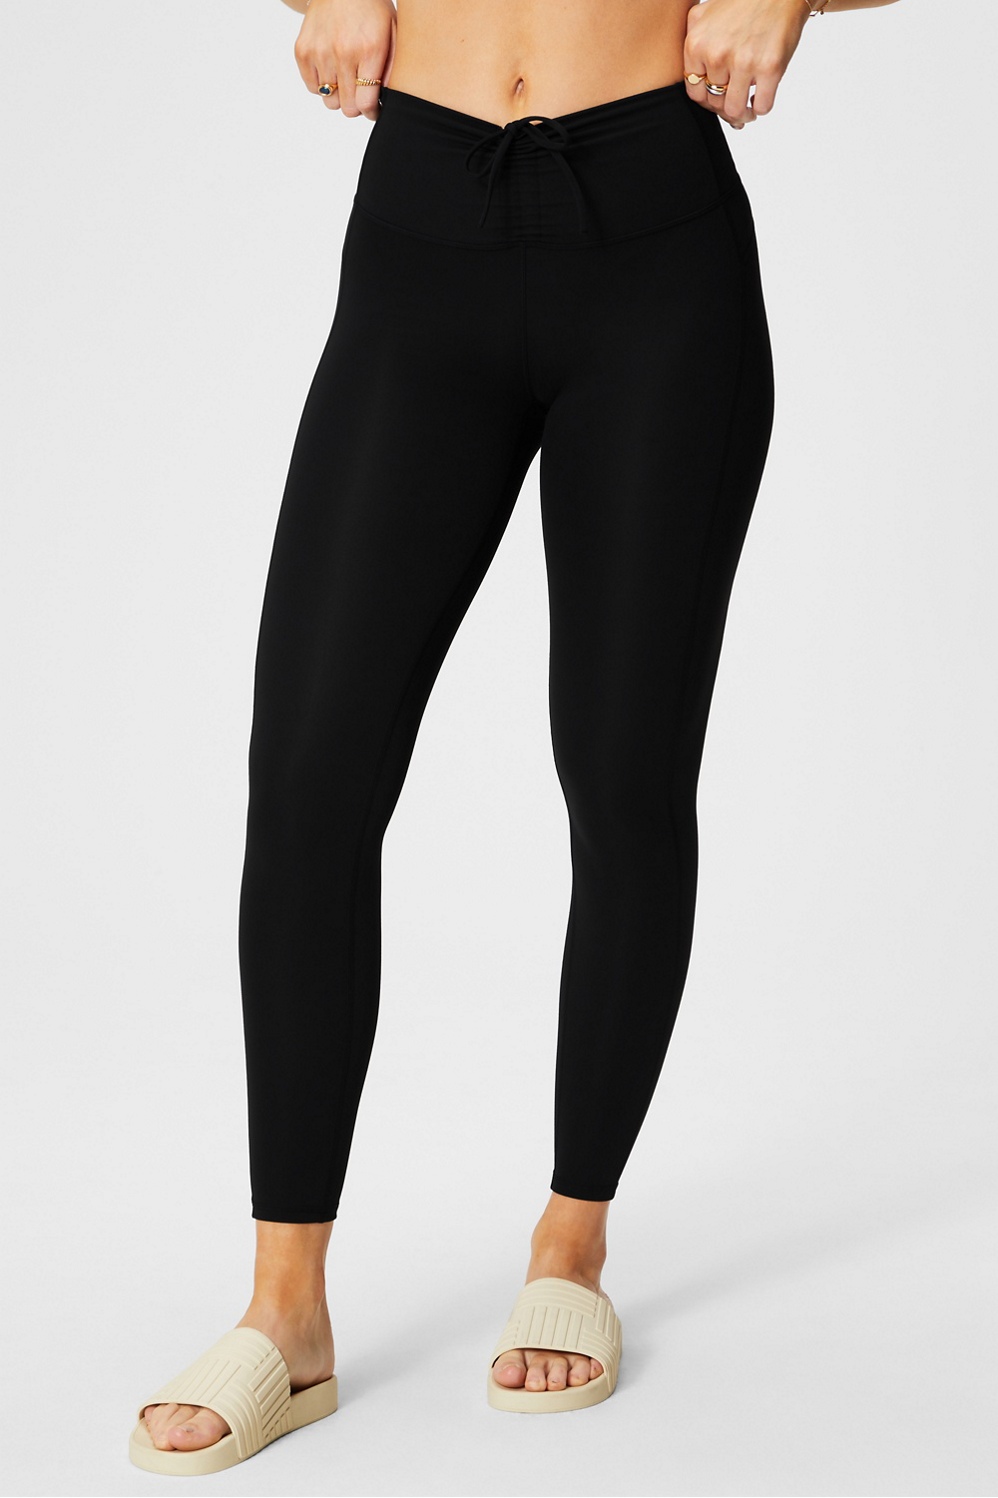 PureLuxe Ultra High Waisted Ruched Legging